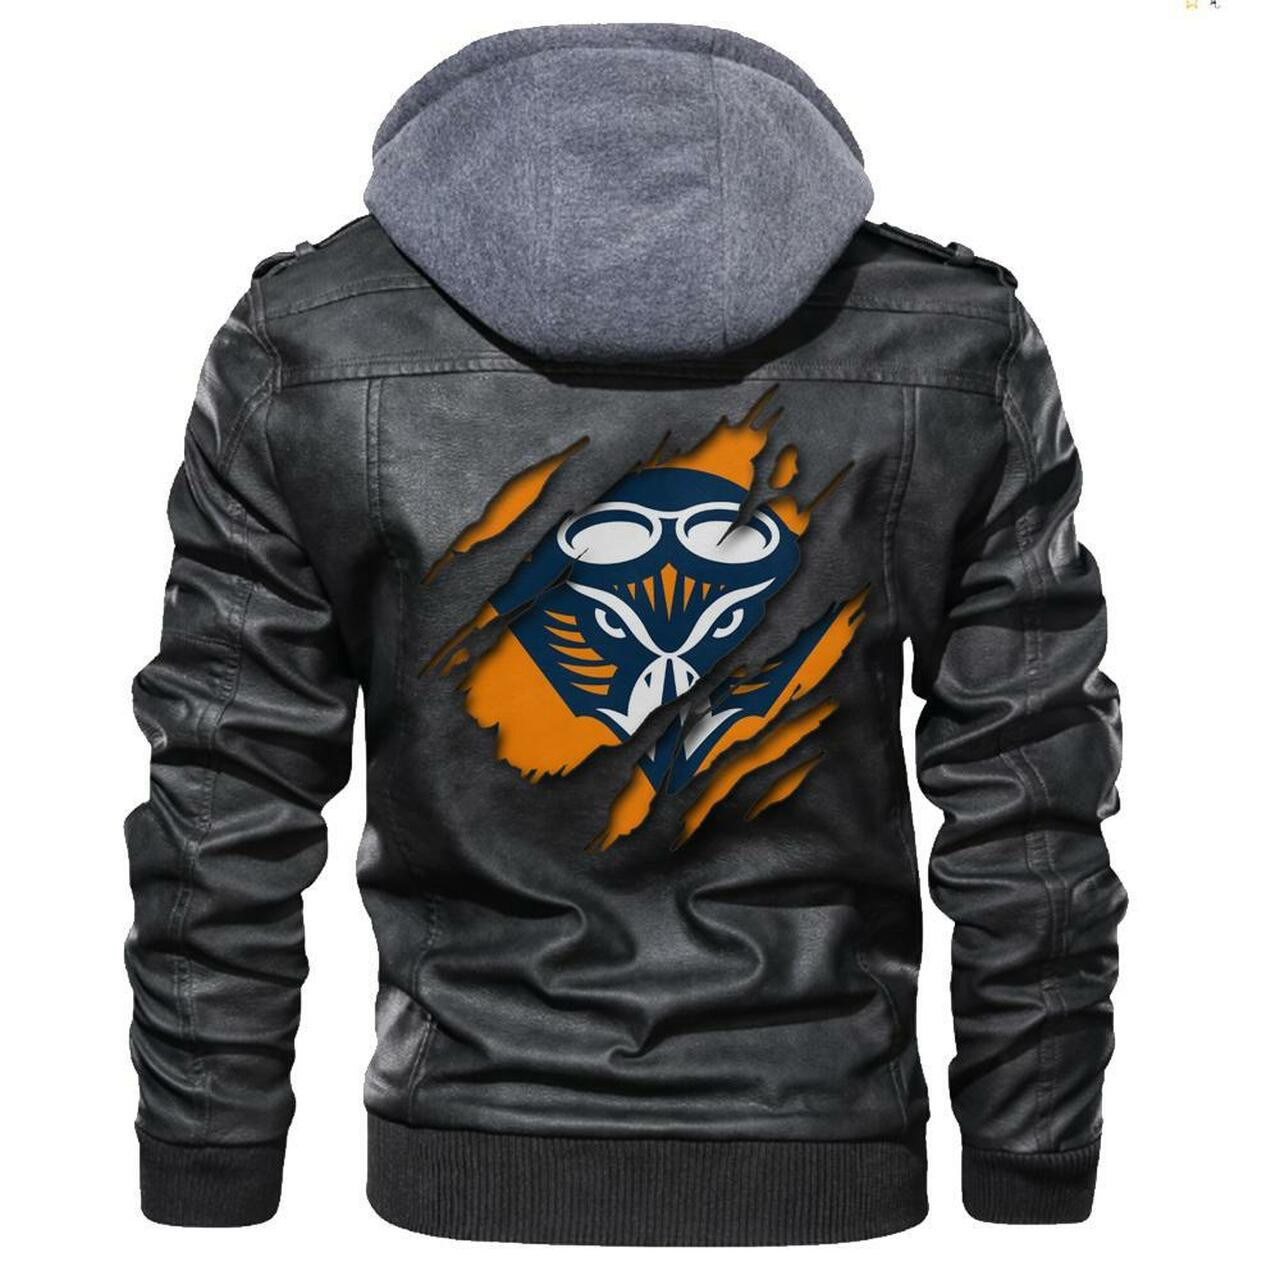 Check out our collection of the latest and greatest leather jacket 223